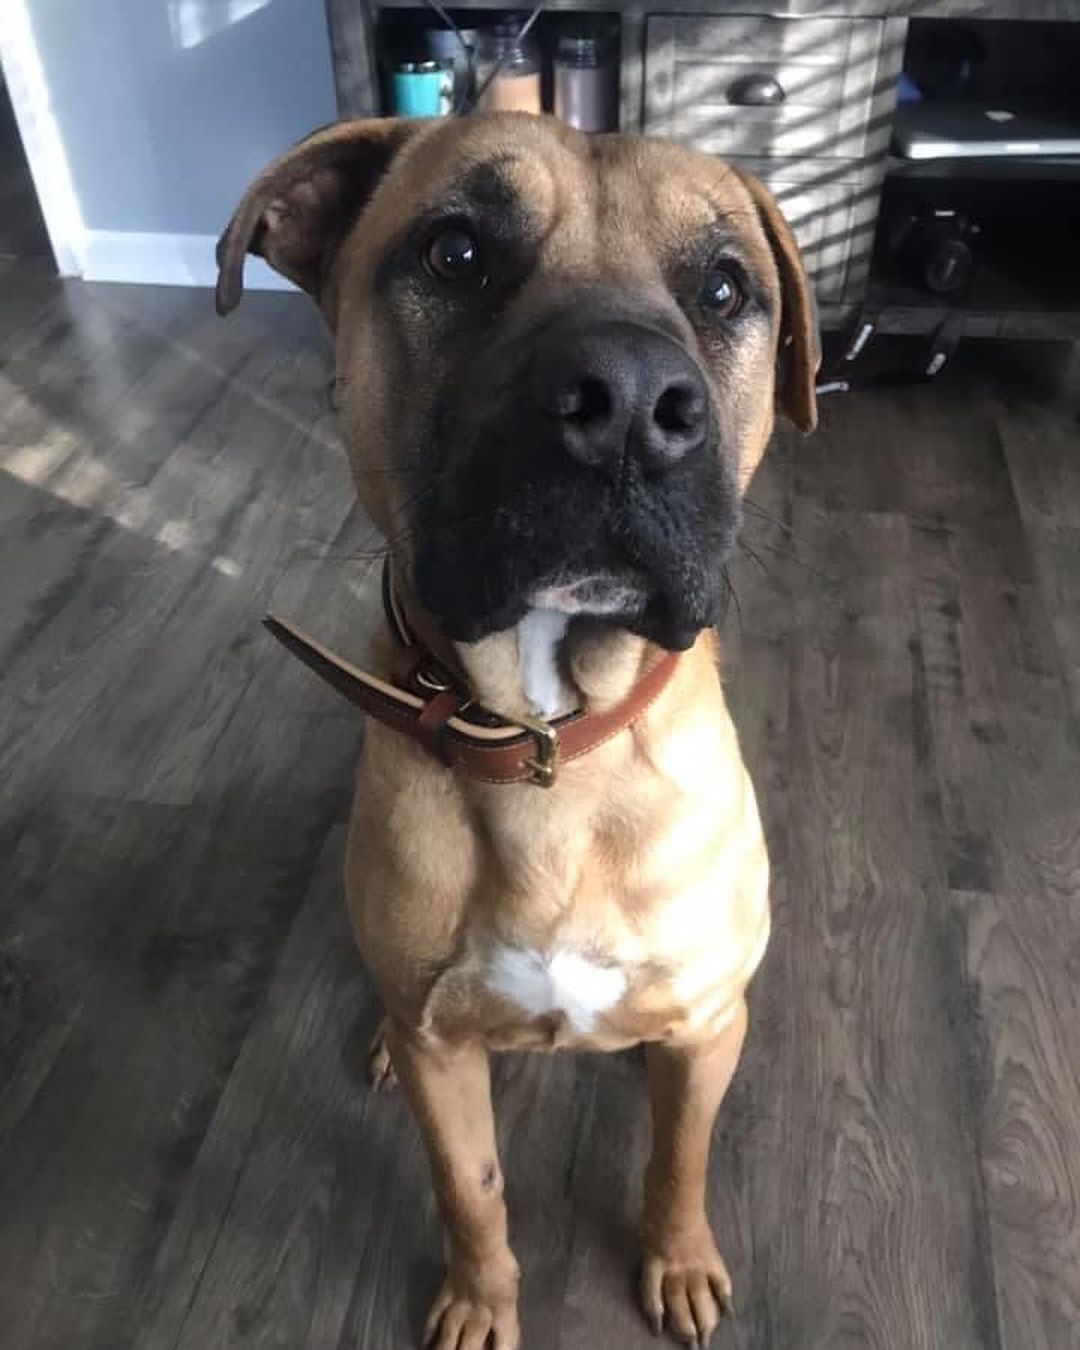 Adopted!!!! Hi! I’m Dino. I’m 2 years old and extremely well mannered. I know basic commands and take treats extremely gently (*hint* *hint* give me more treats!!) I like female dogs but would do best in a home where I am the only dog. I am crate trained and enjoy napping in my crate while my foster mom works. I walk well on a leash and love to be outside. I arrived from South Carolina three days ago and have already seen snow! It was pretty cool and I loved walking in it but I’m ok if it doesn’t happen again until winter *paws crossed* If you want a big softie that loves people and attention I’m your guy.